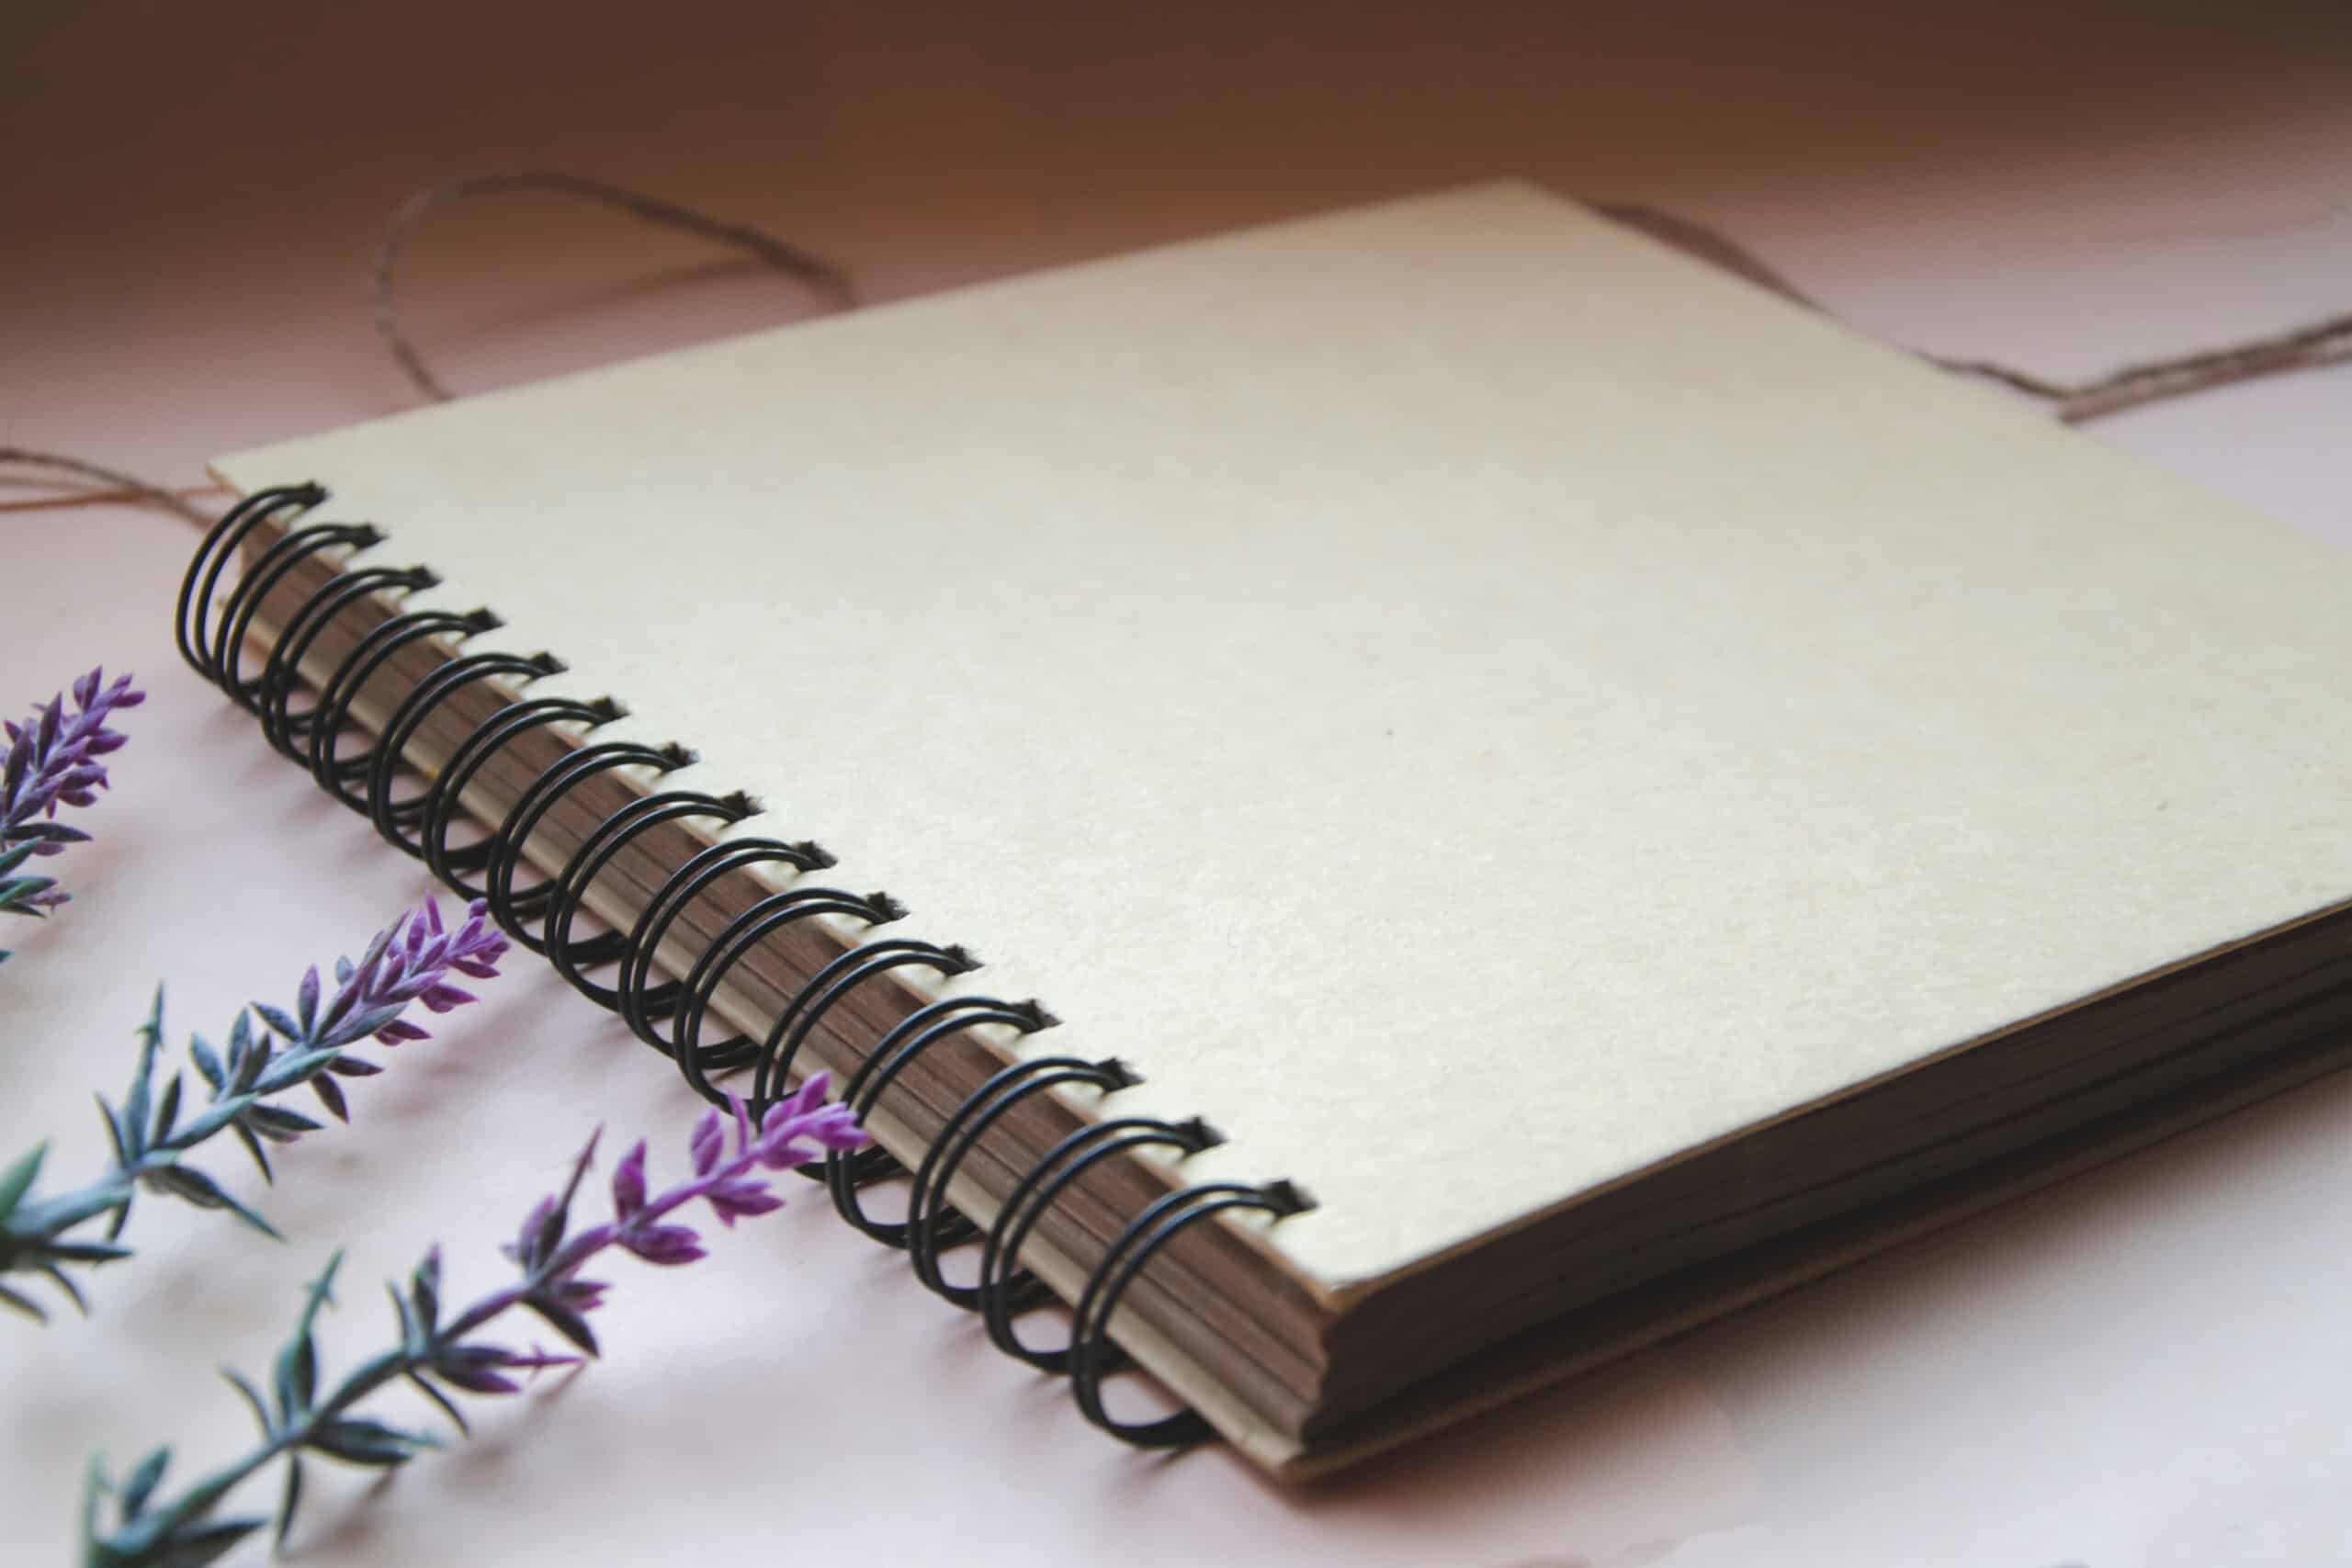 Brown spiral notebook on light background with lavender flowers